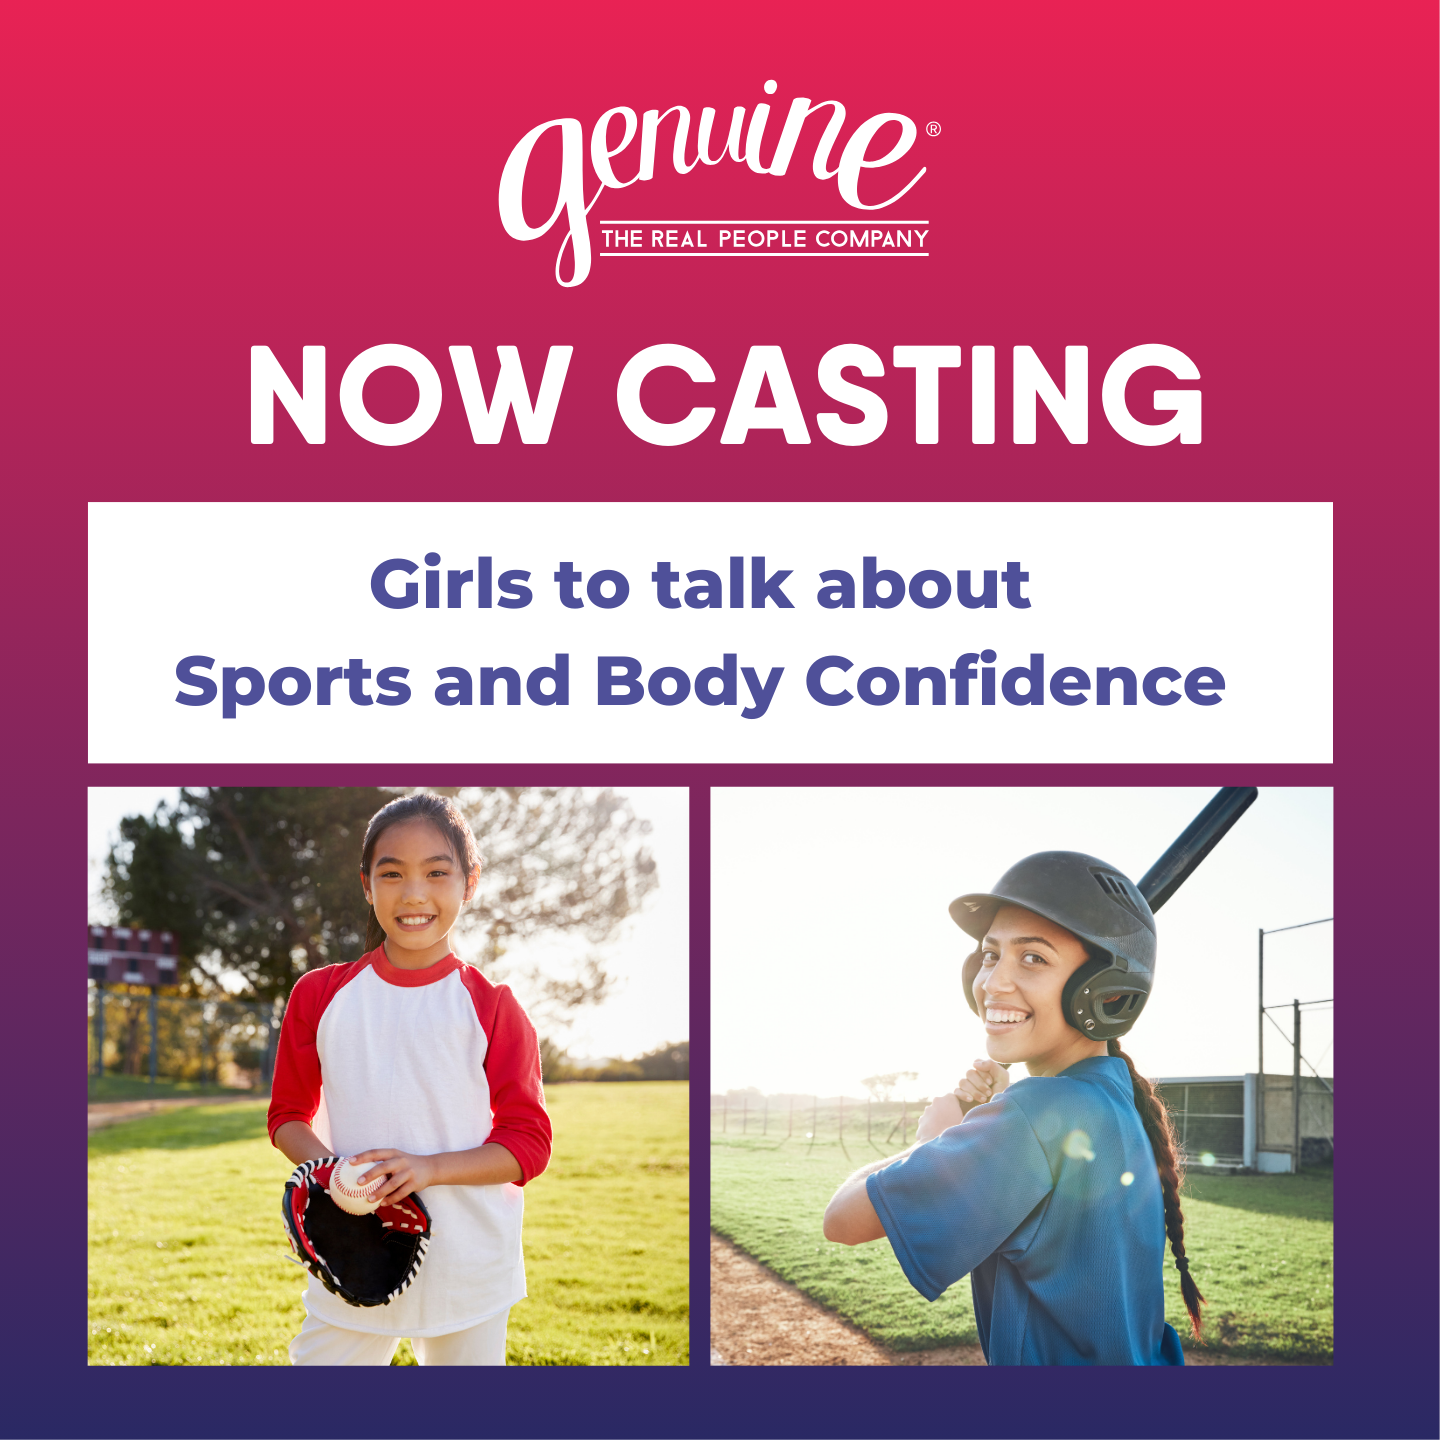 CASTING: GIRLS TO TALK ABOUT SPORTS AND BODY CONFIDENCE